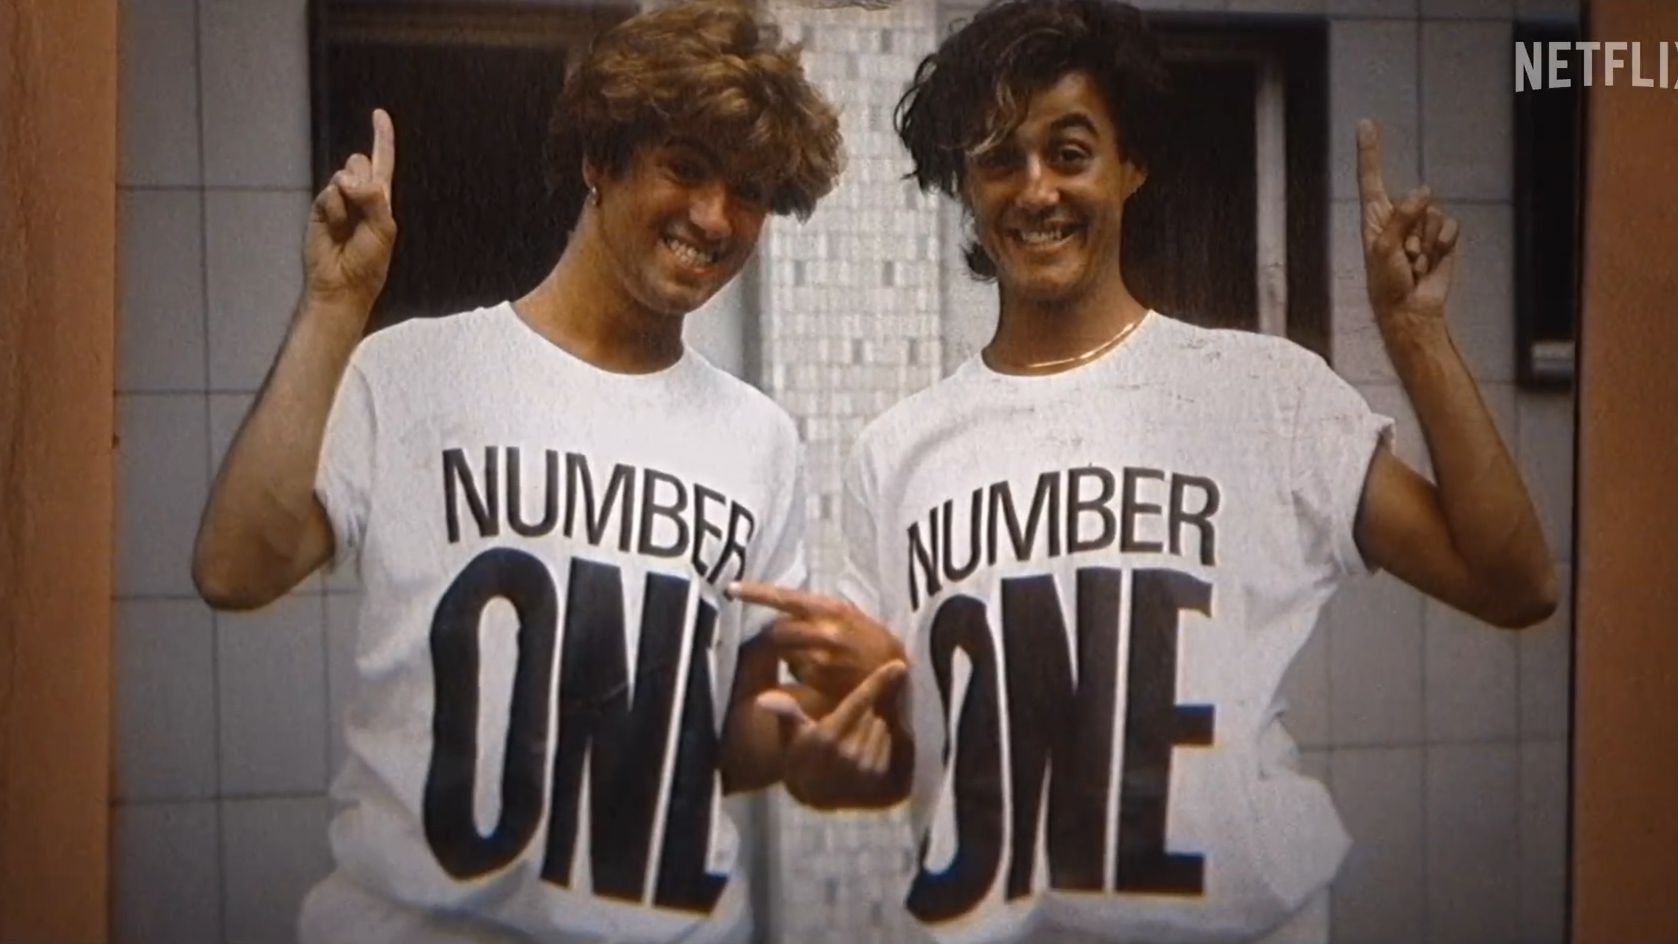 Andrew Ridgeley on George Michael and Life After Wham! - The New